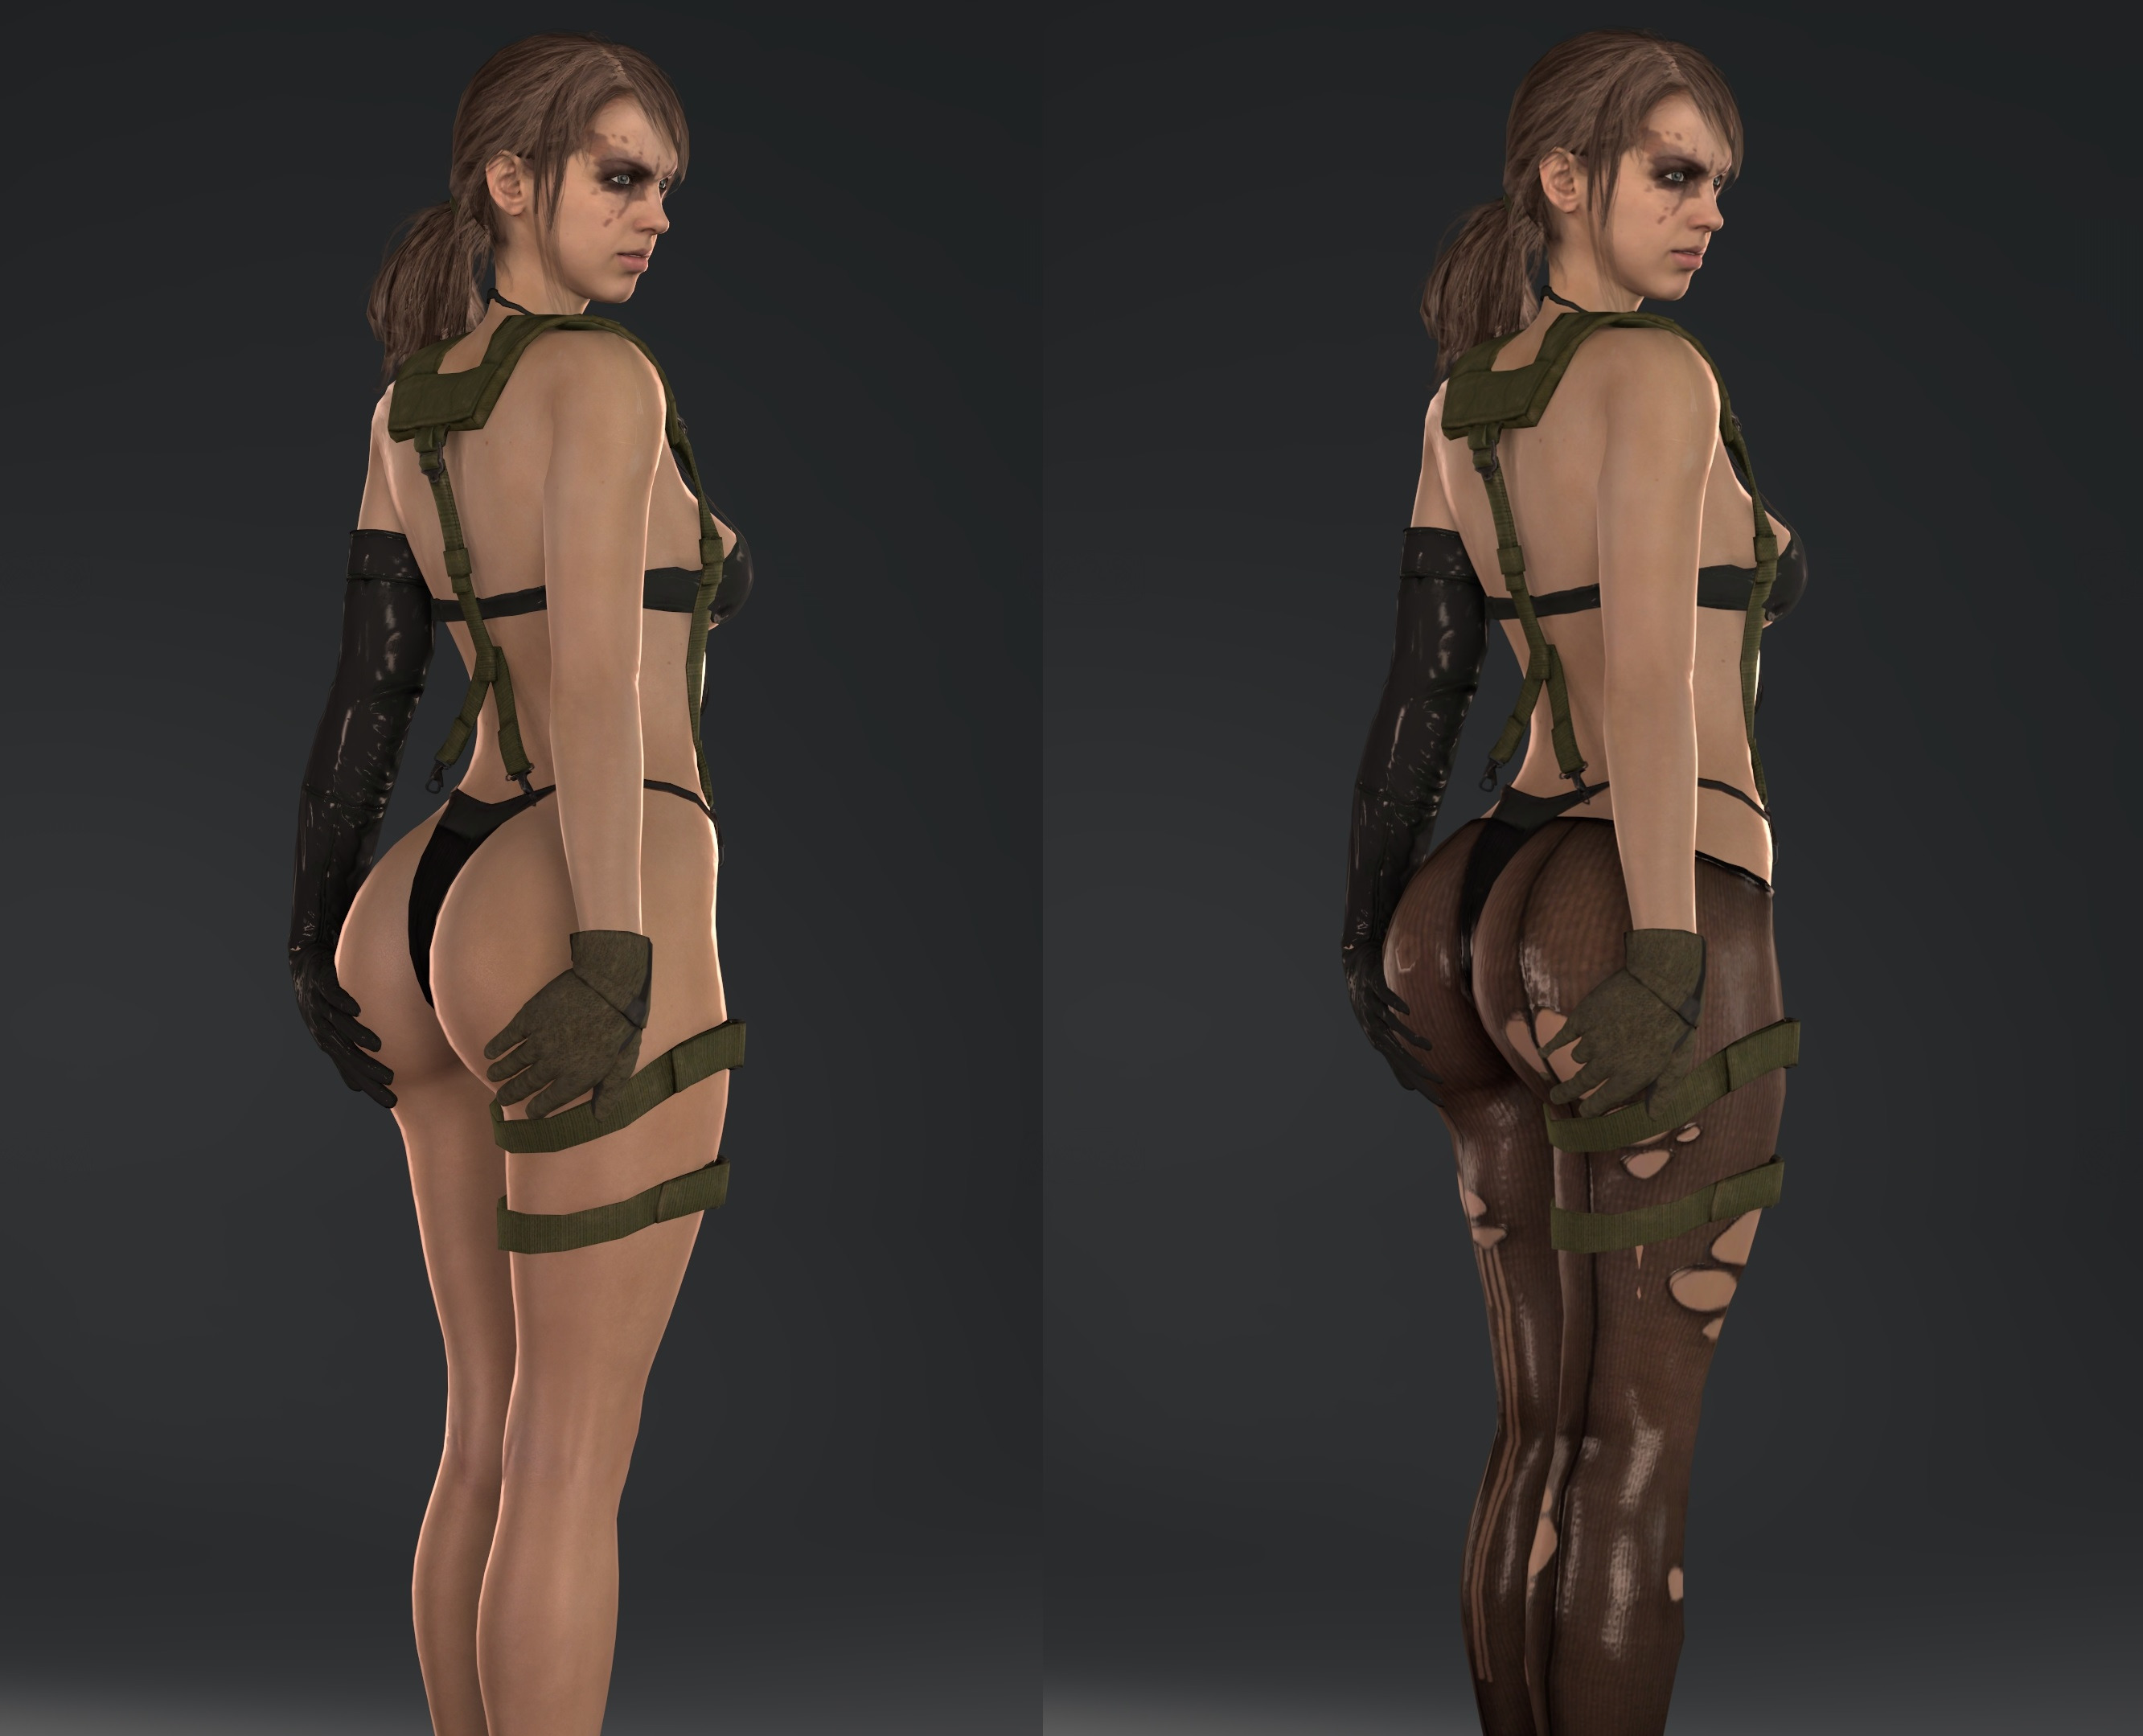 ceven bates recommends Mgs Quiet Rule 34